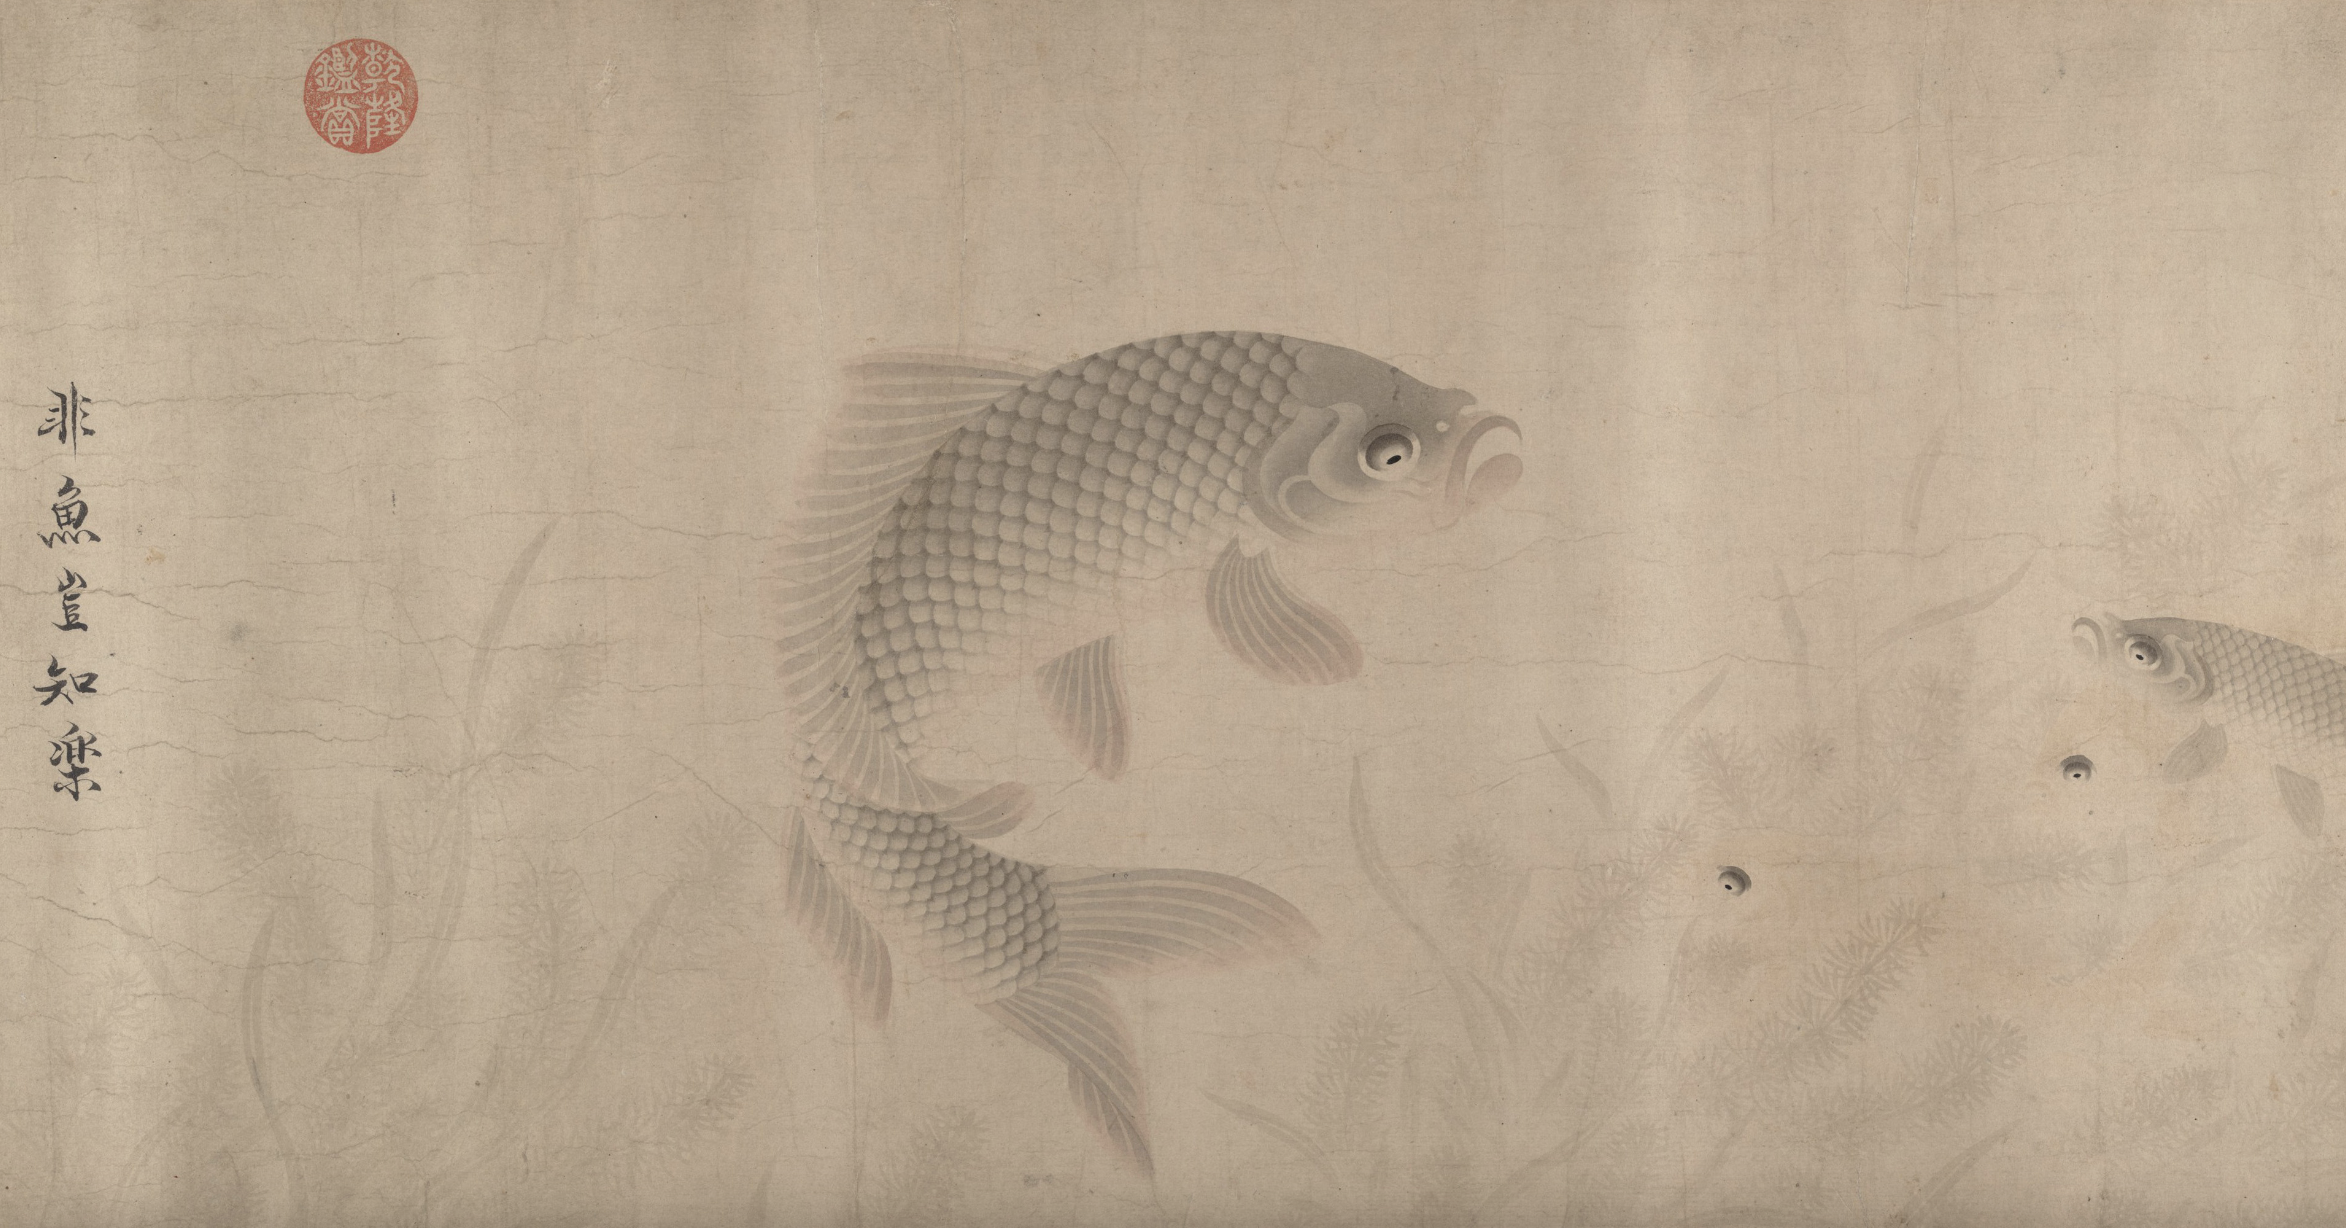 Zhou Dongqing, The Pleasures of Fishes (1291)